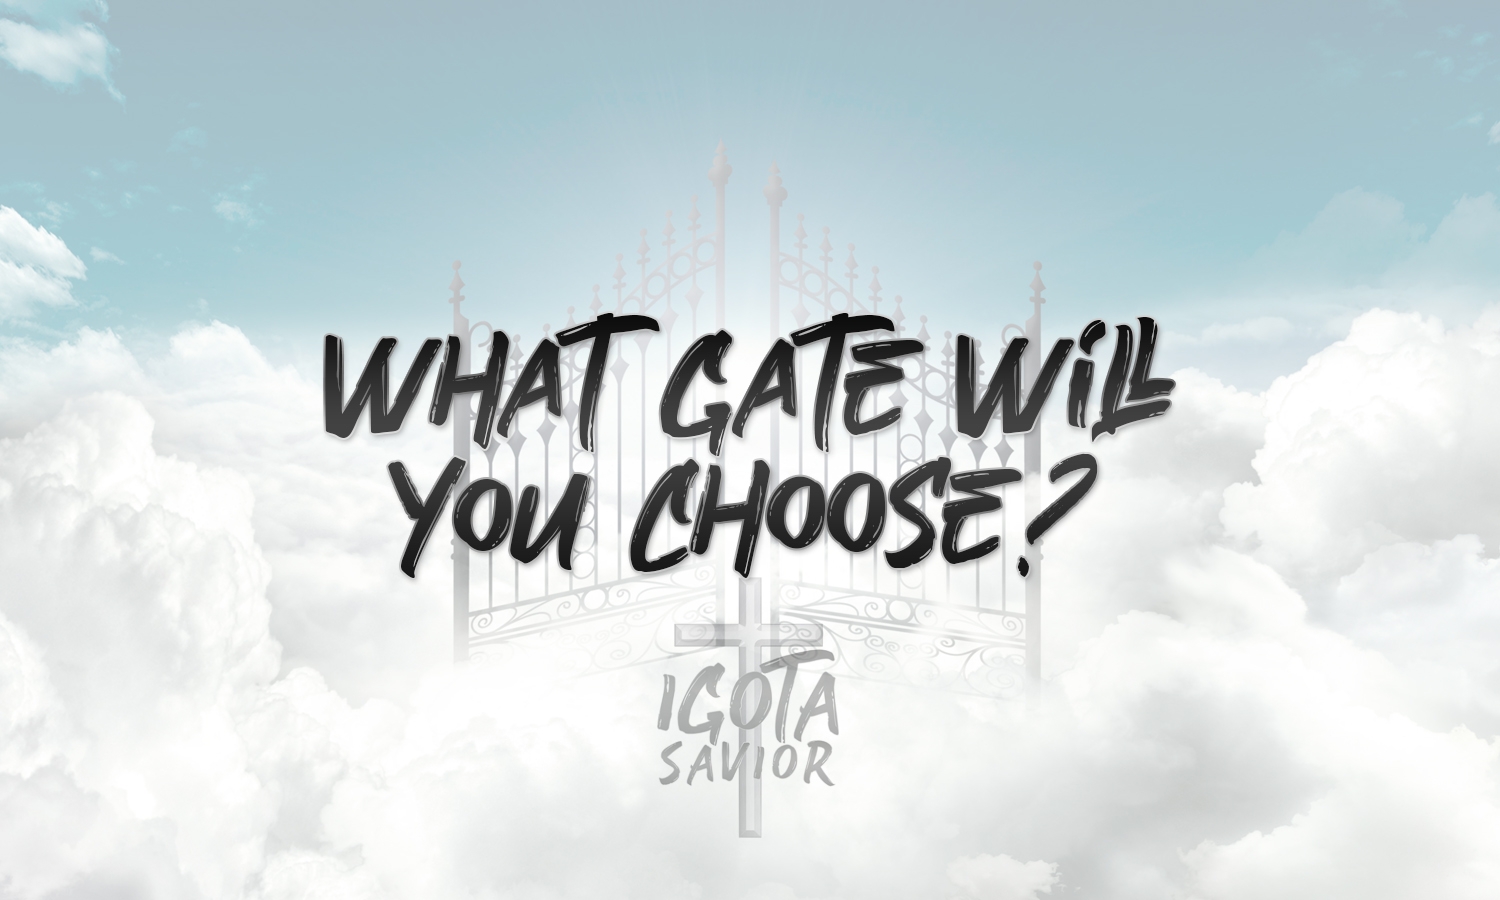 What Gate Will You Choose?